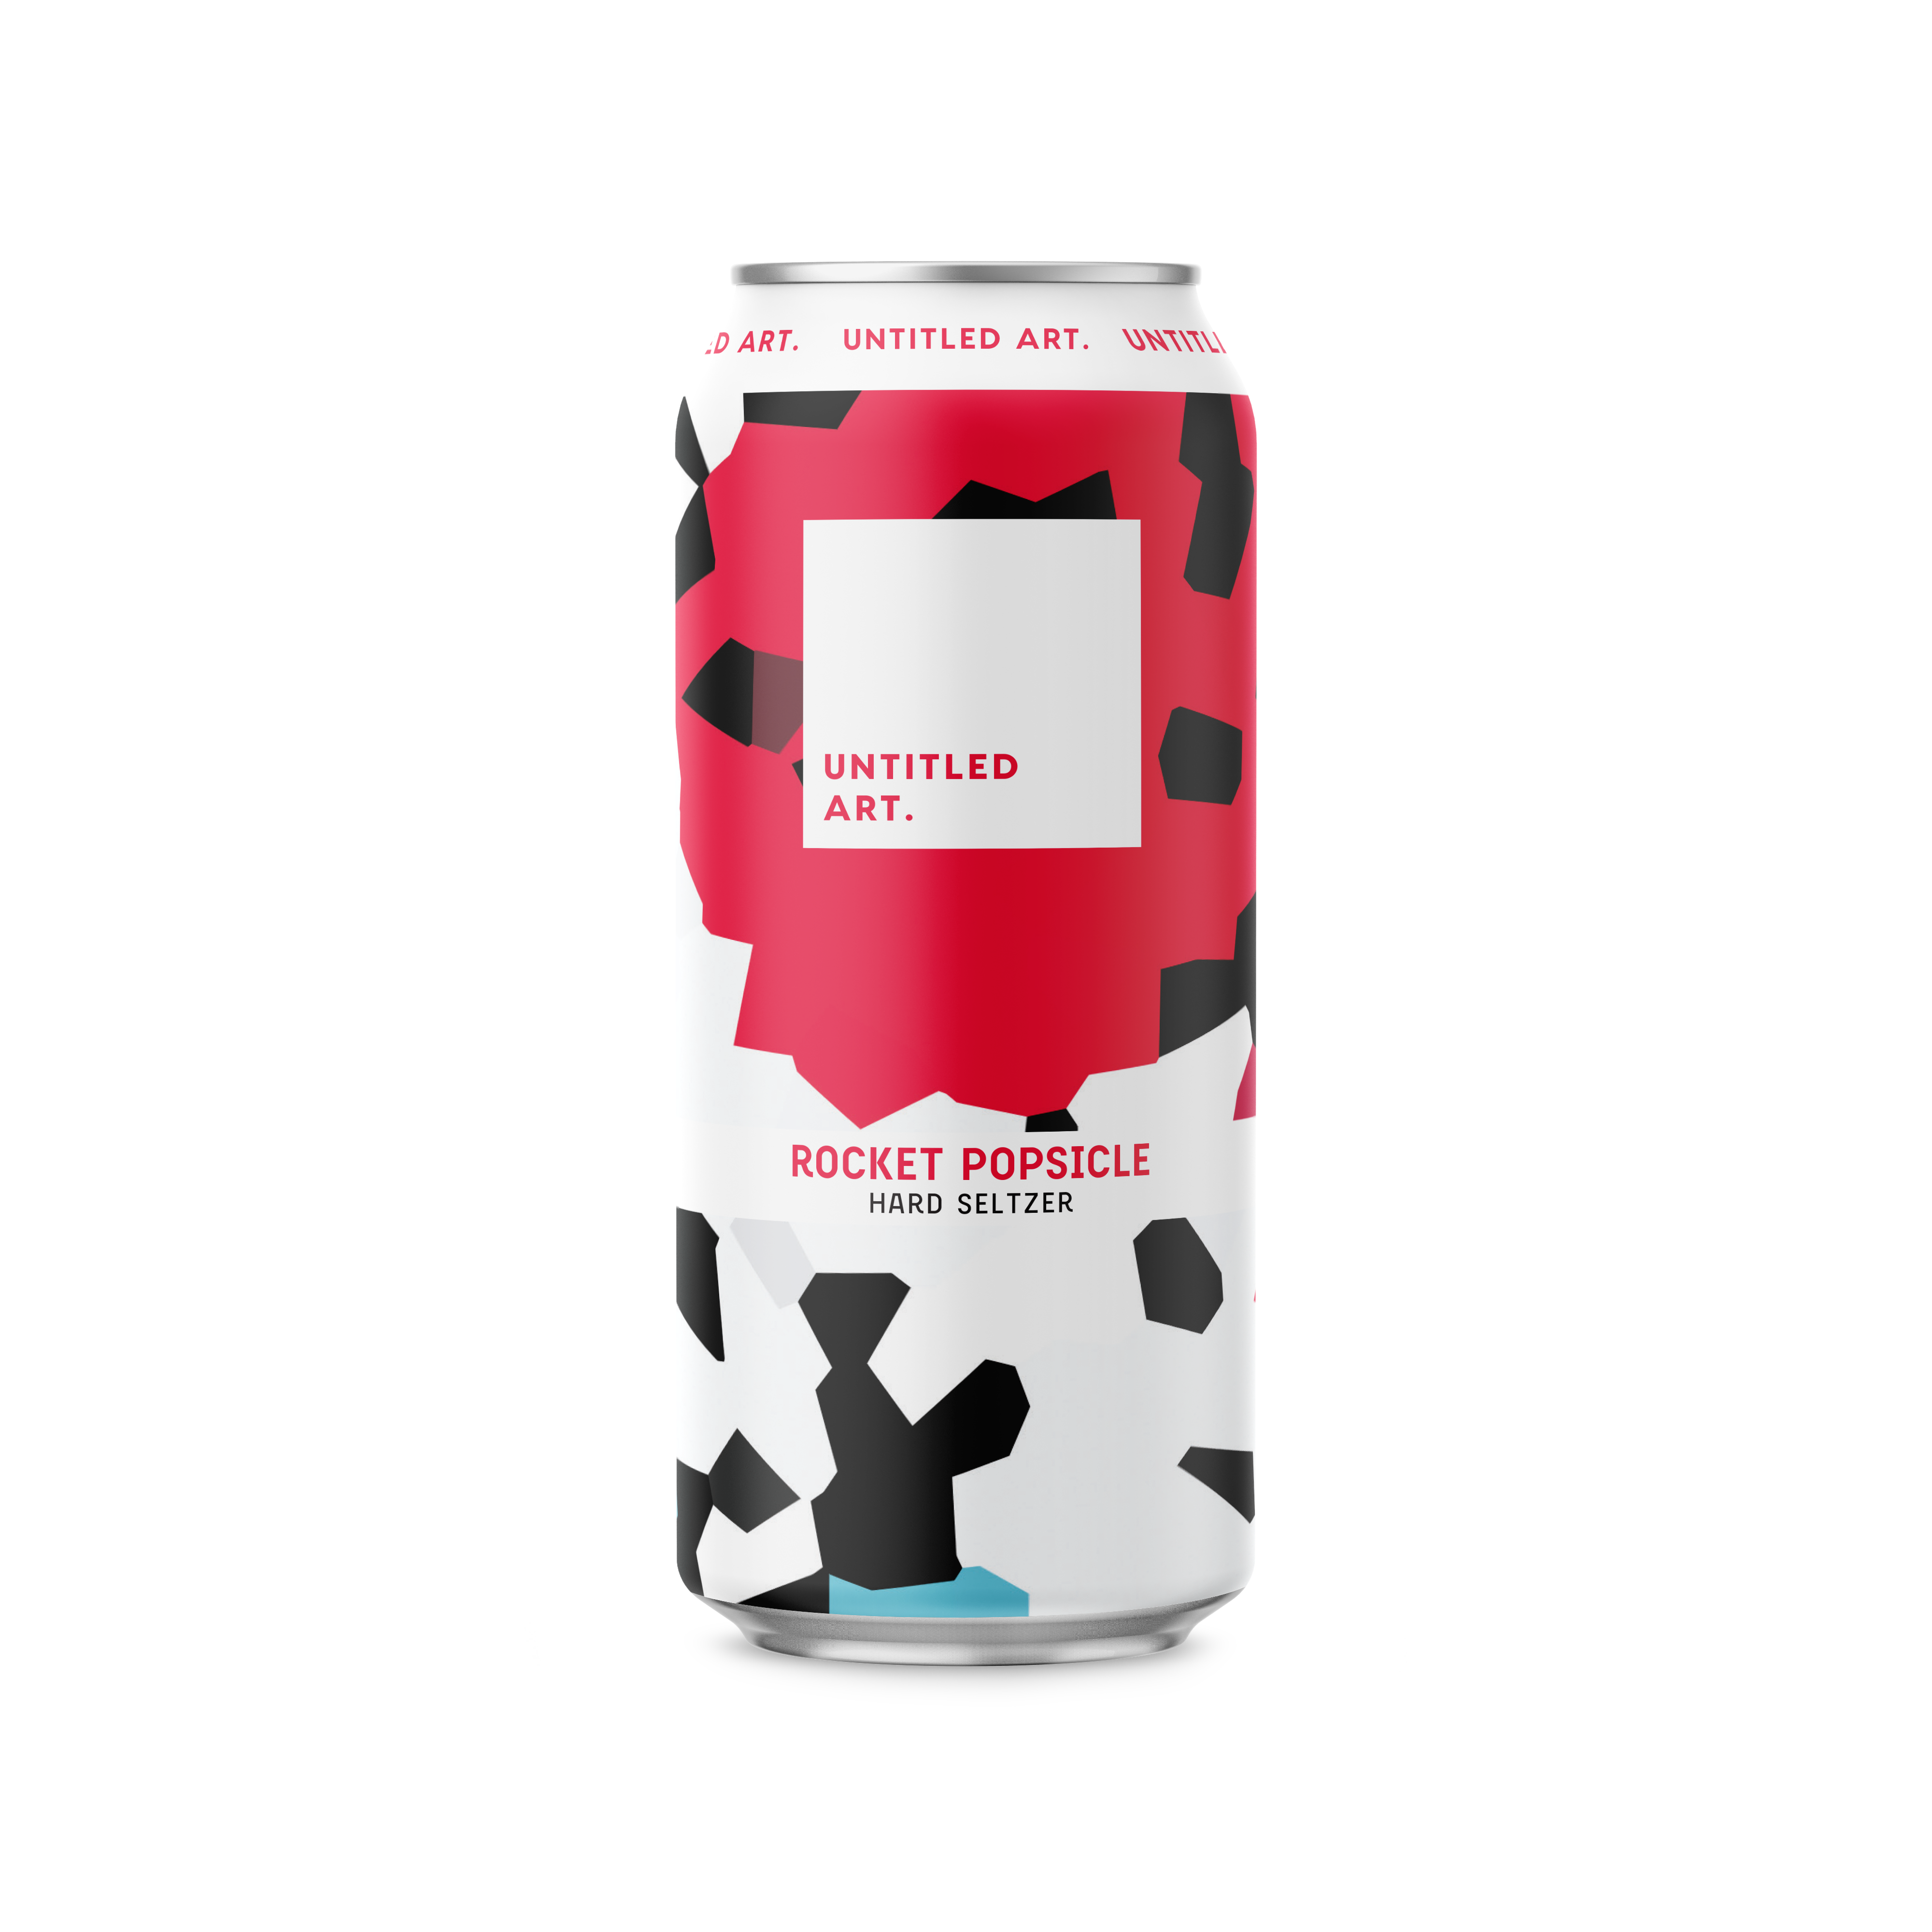 A can with a black and white pattern on it.